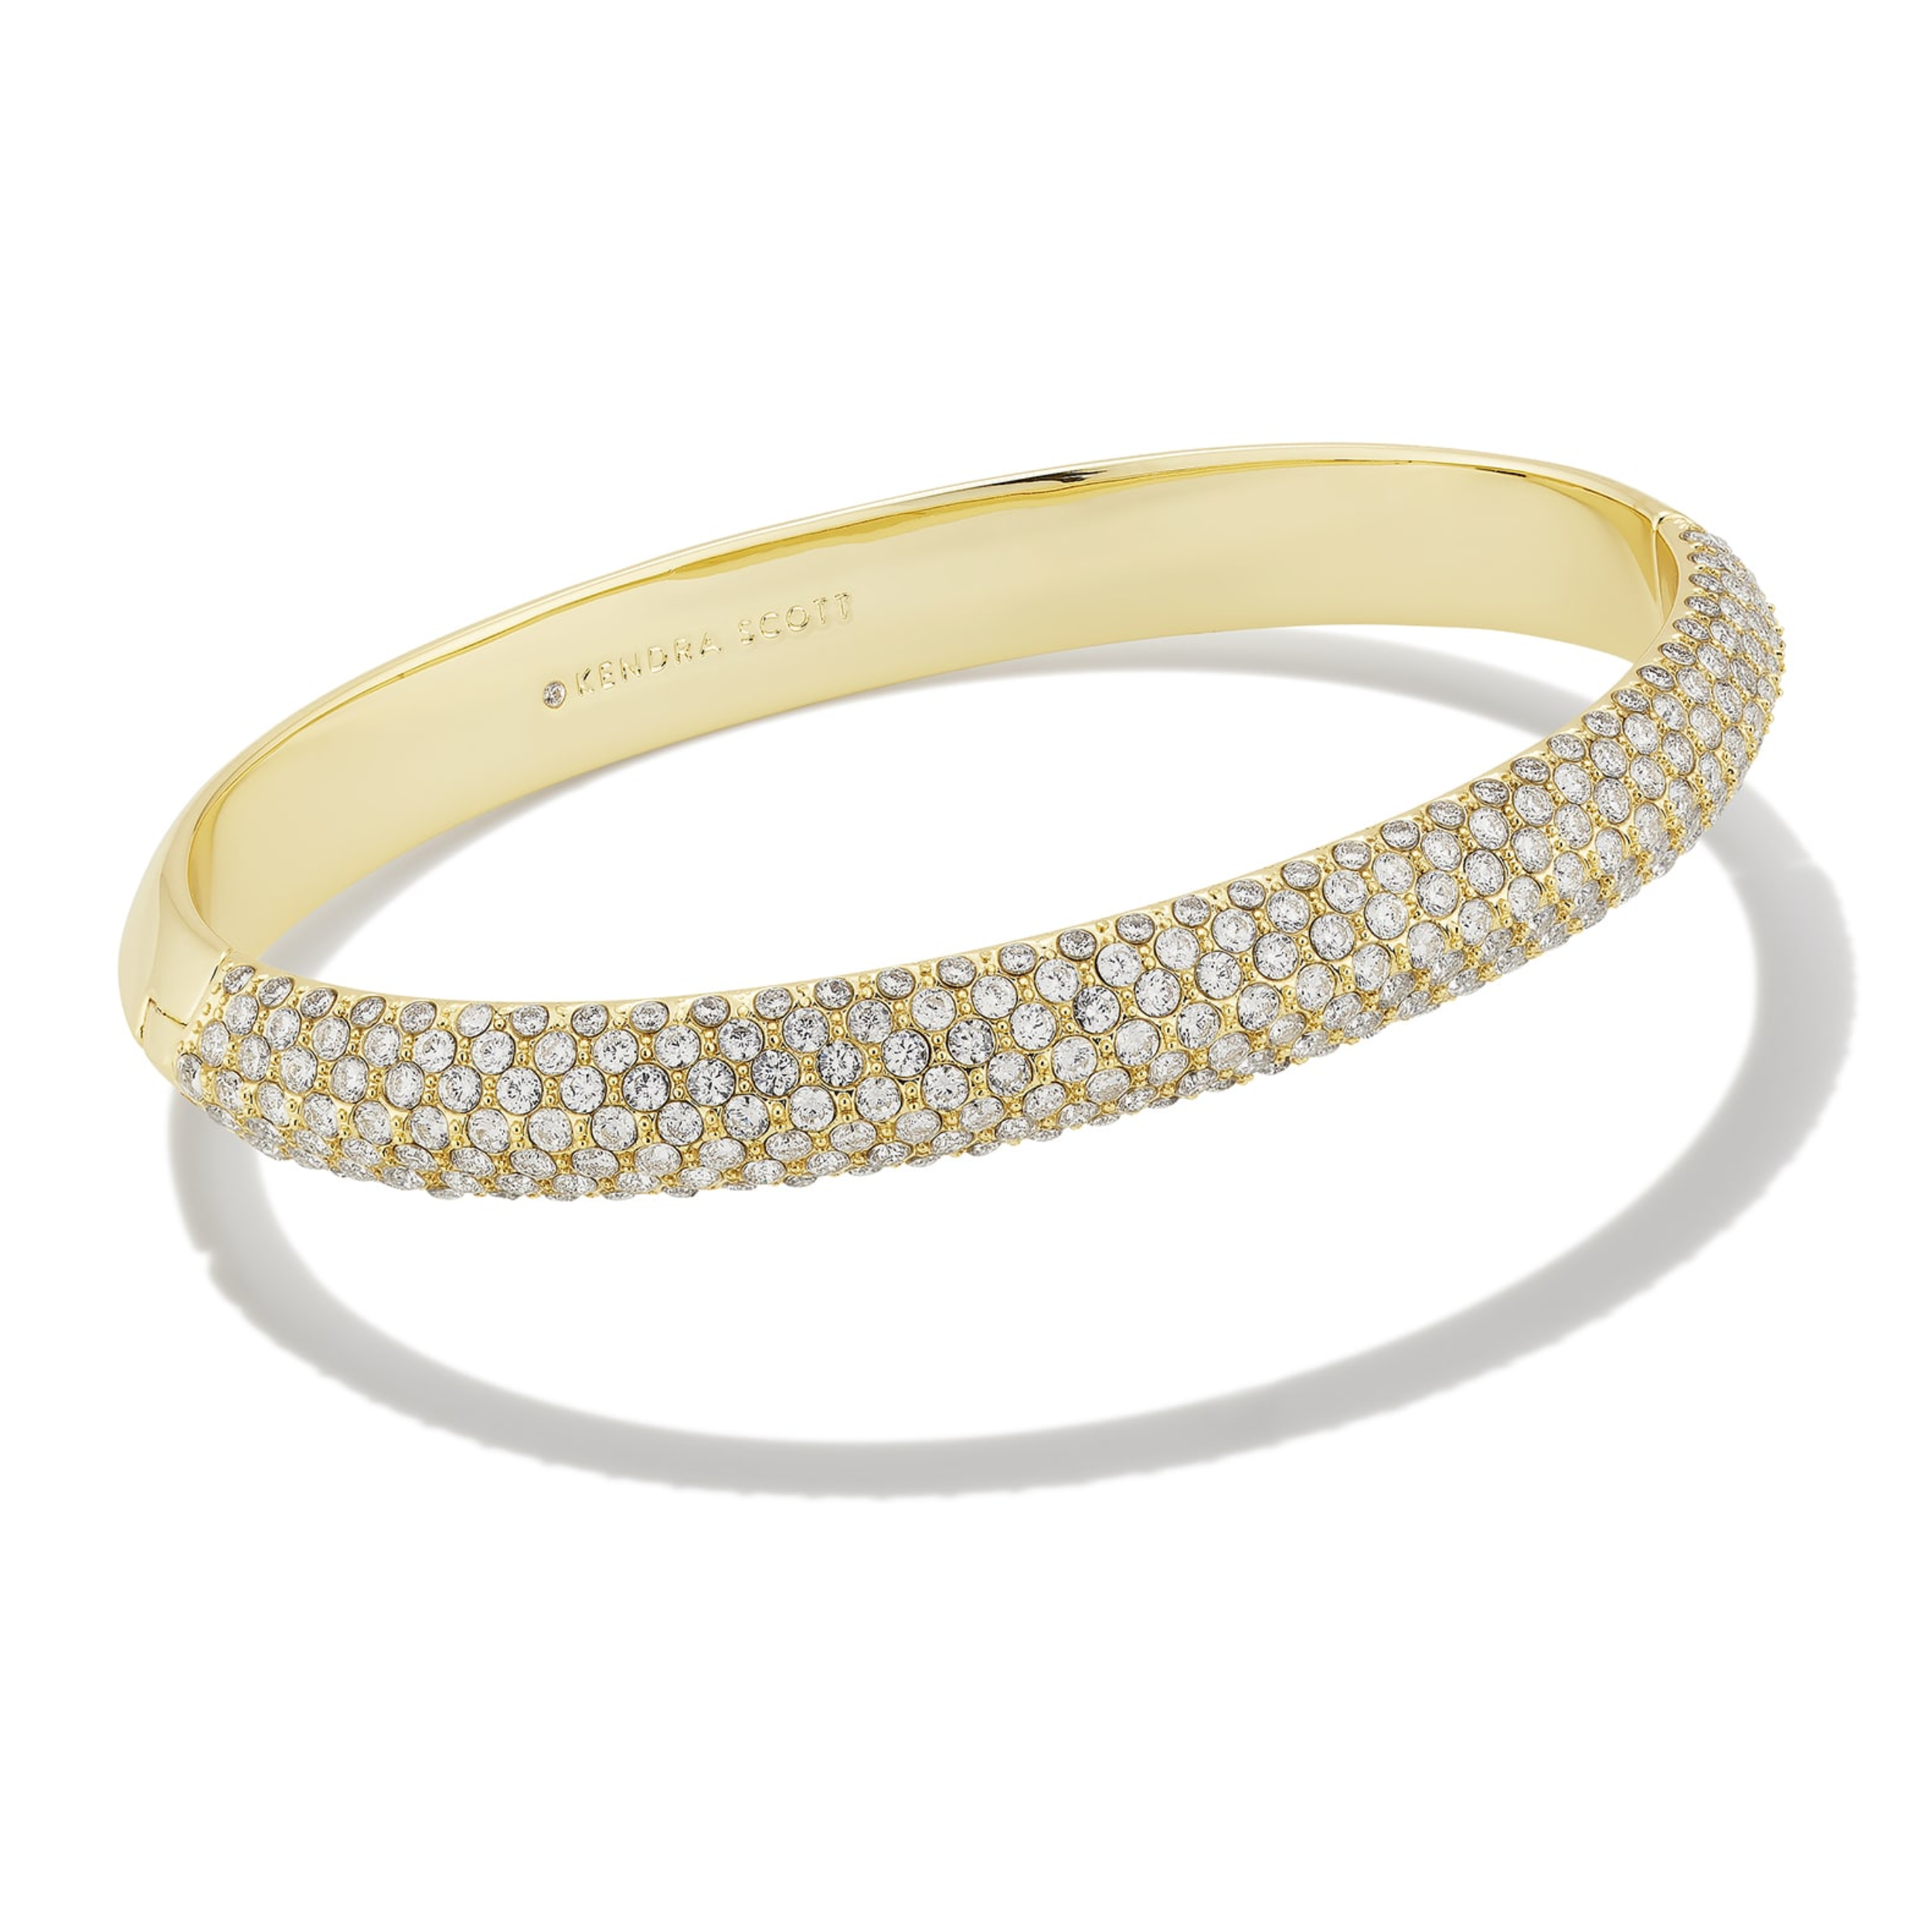 This Mikki Pave Bangle Bracelet In Gold White by Kendra Scott is pictured on a white background.